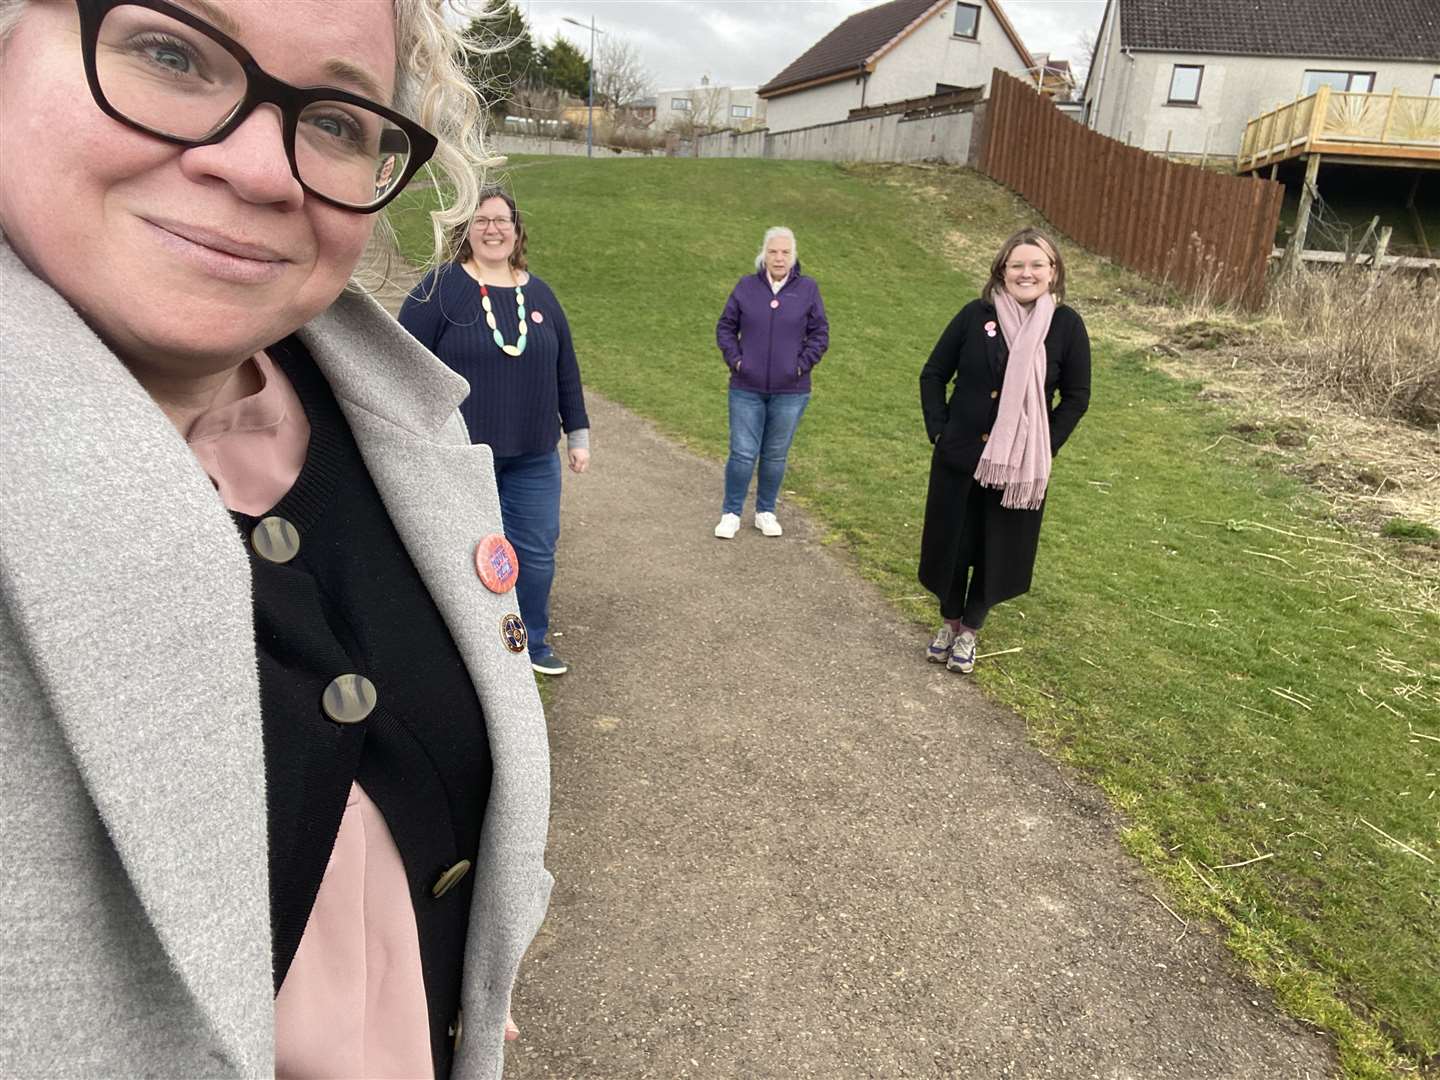 Some of the Thurso Community Development Trust staff – Joan Lawrie, Sarah Finalyson, Helen Allan and Zoe Mackenzie – promoting the move more challenge.